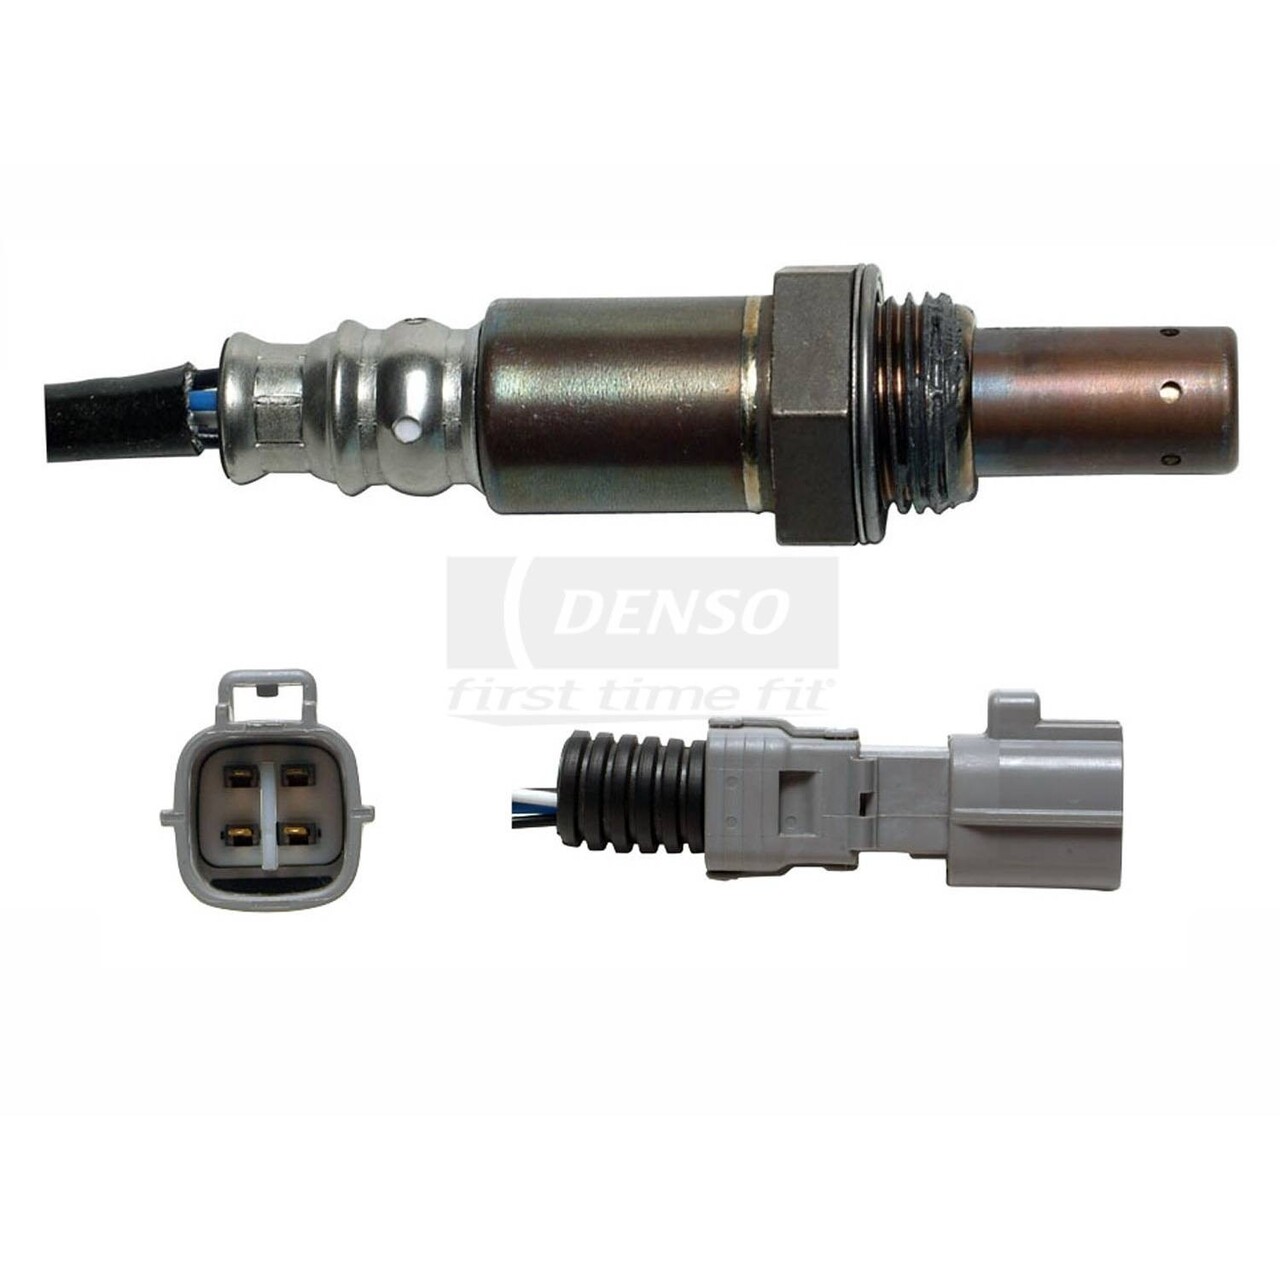 UNIVERSAL DENSO 4 WIRE Oxygen Sensor-OE Style FOR TOYOTA AND LEXUS NO BOX